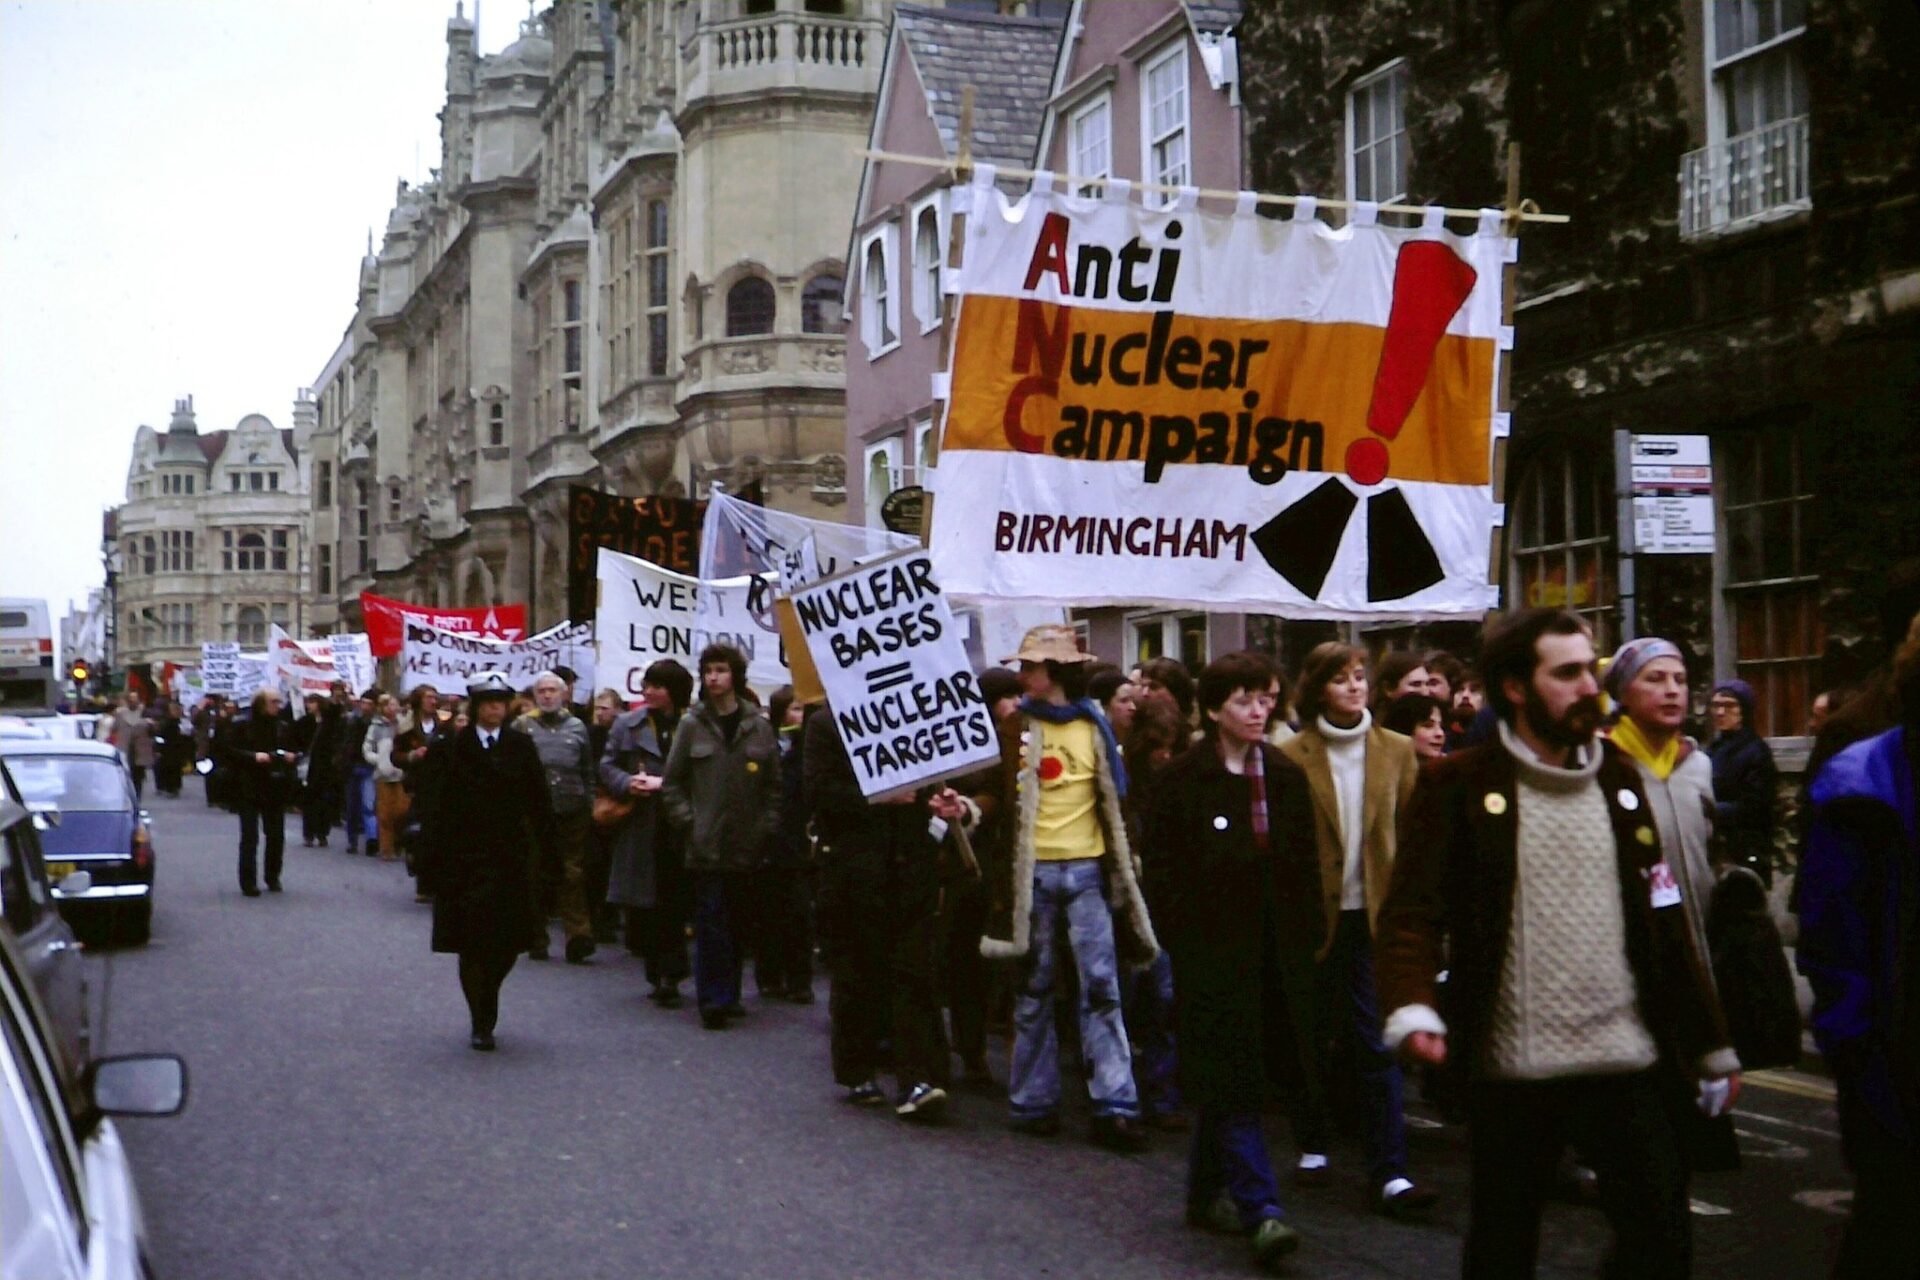 Anti-nuclear weapons protest march, Oxford, England, 1980. The protestors, seen here marching past Oxford's Town Hall, were objecting to the proposed stationing of cruise missiles at the U.S. Air Force base at Upper Heyford (Kim Traynor via Wikimedia Commons)